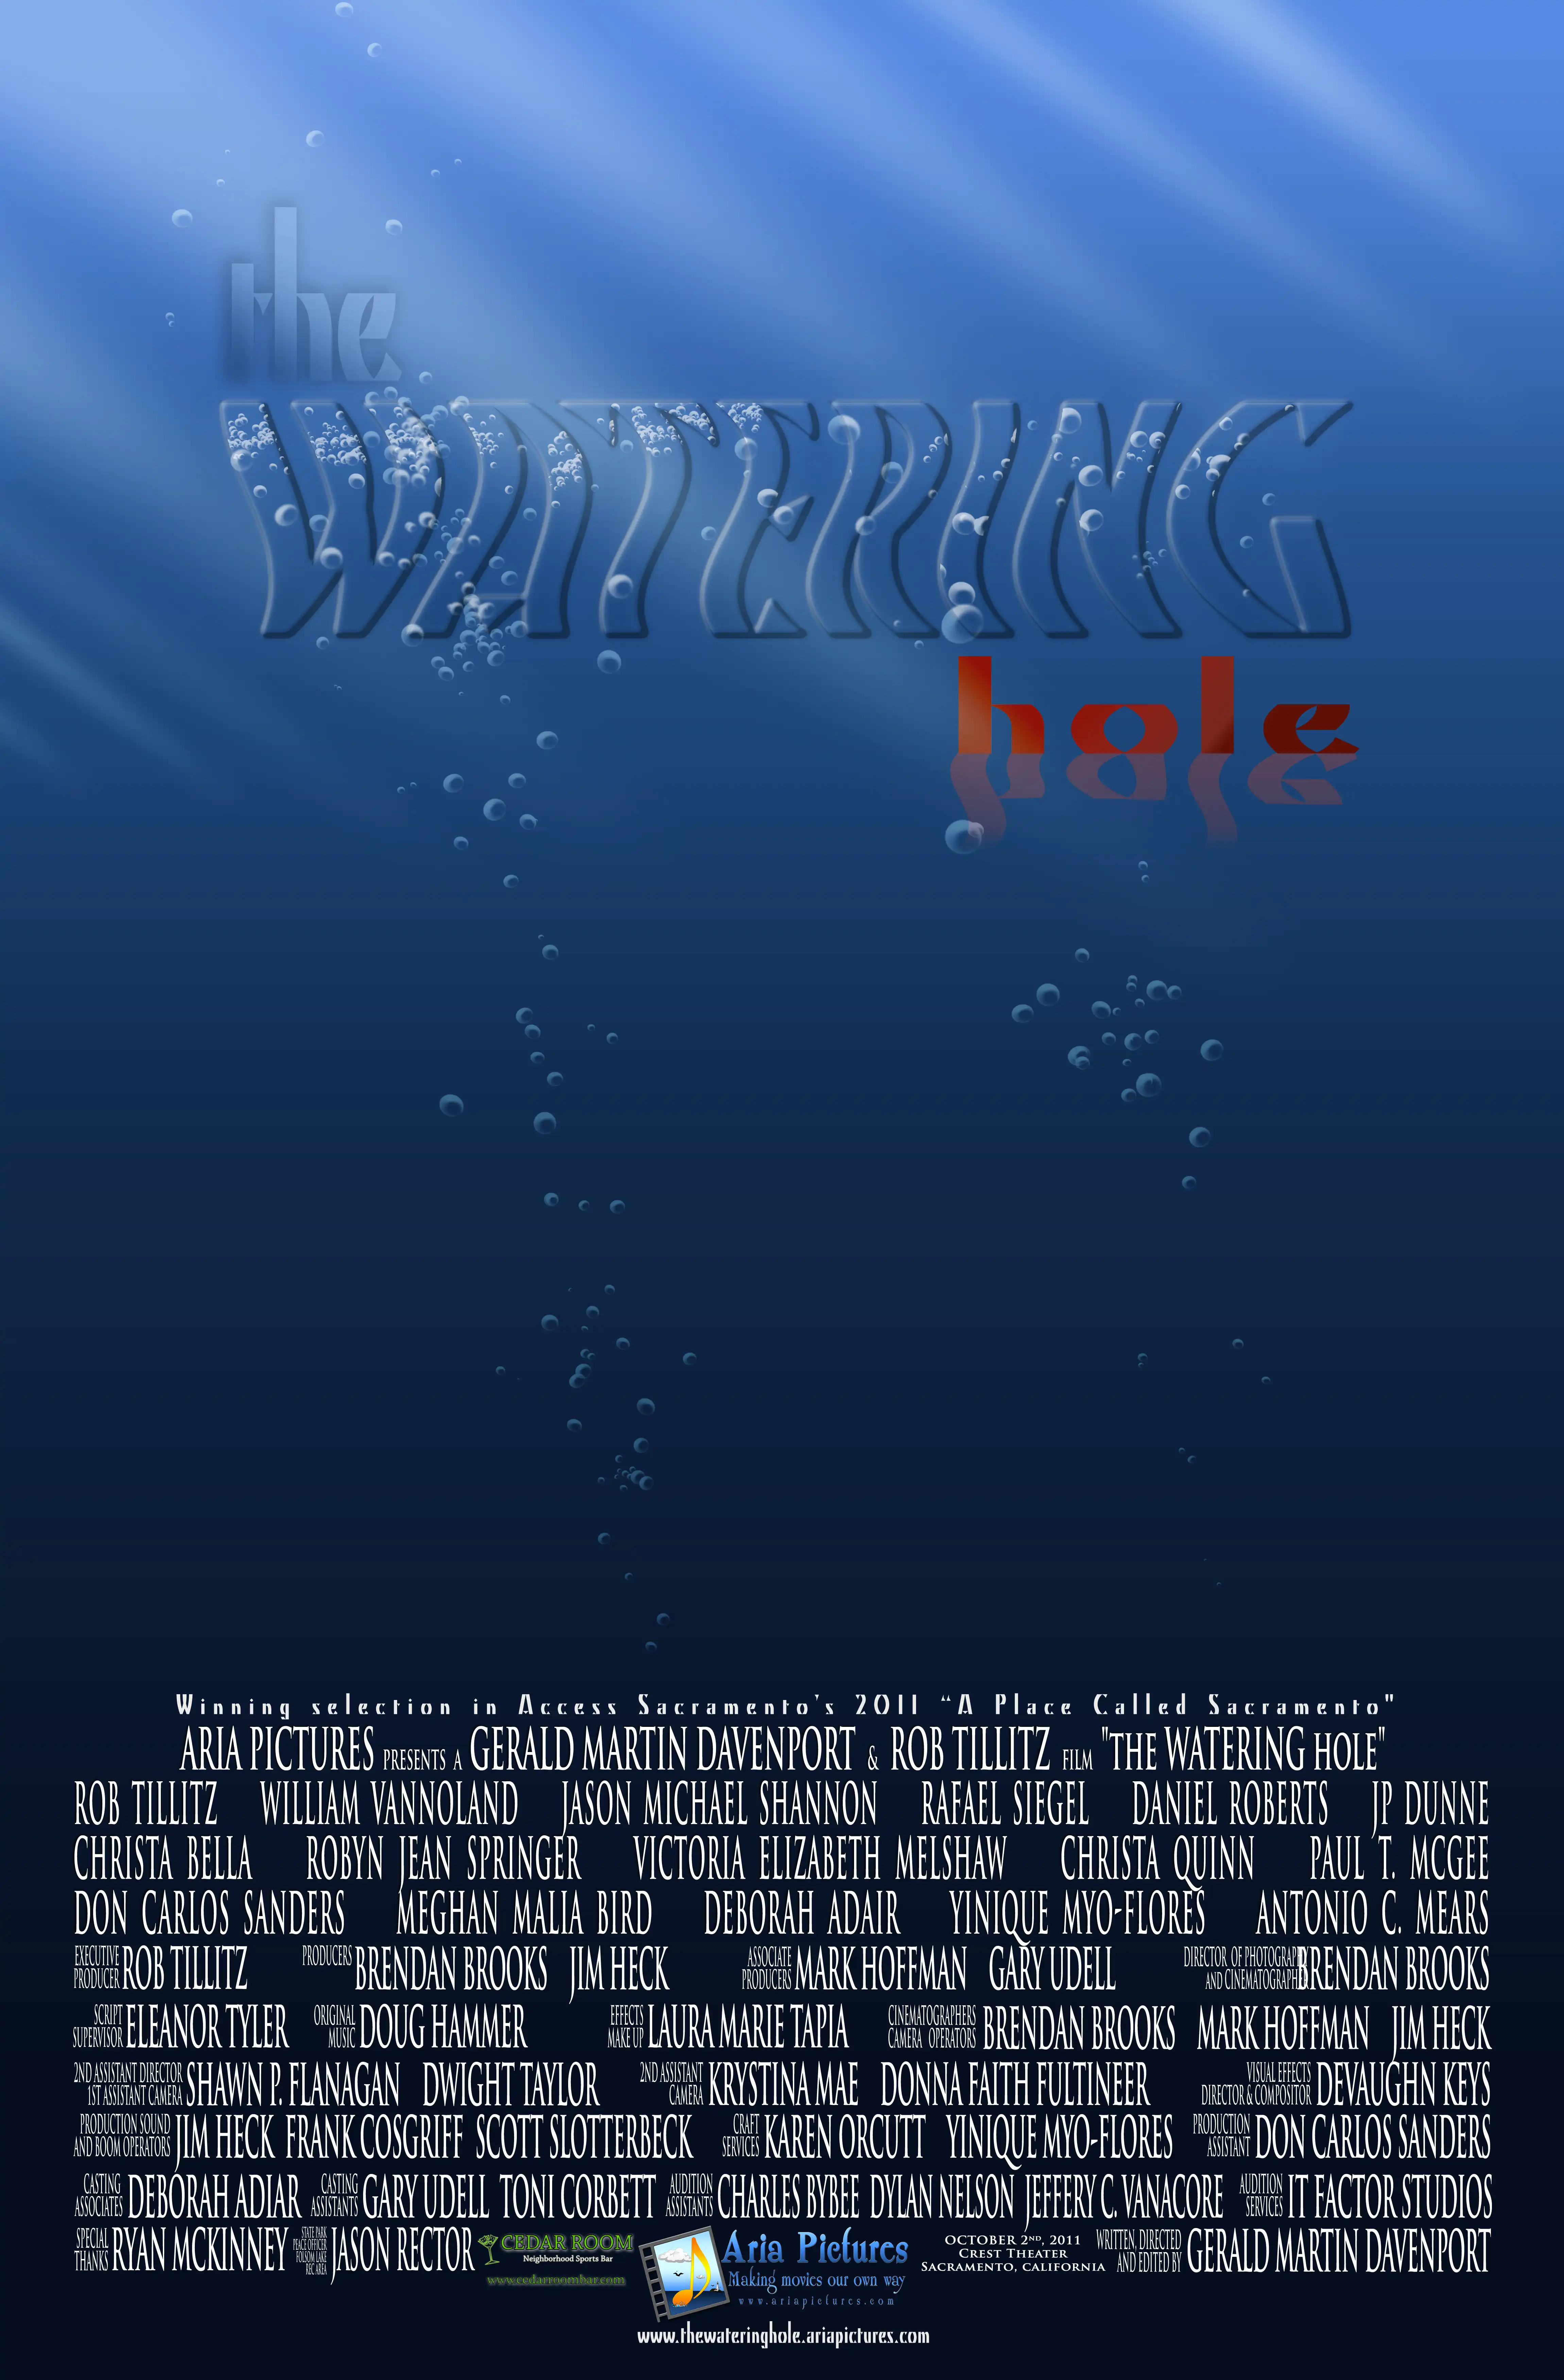 Altered Official movie poster for  the WATERING hole (2011).